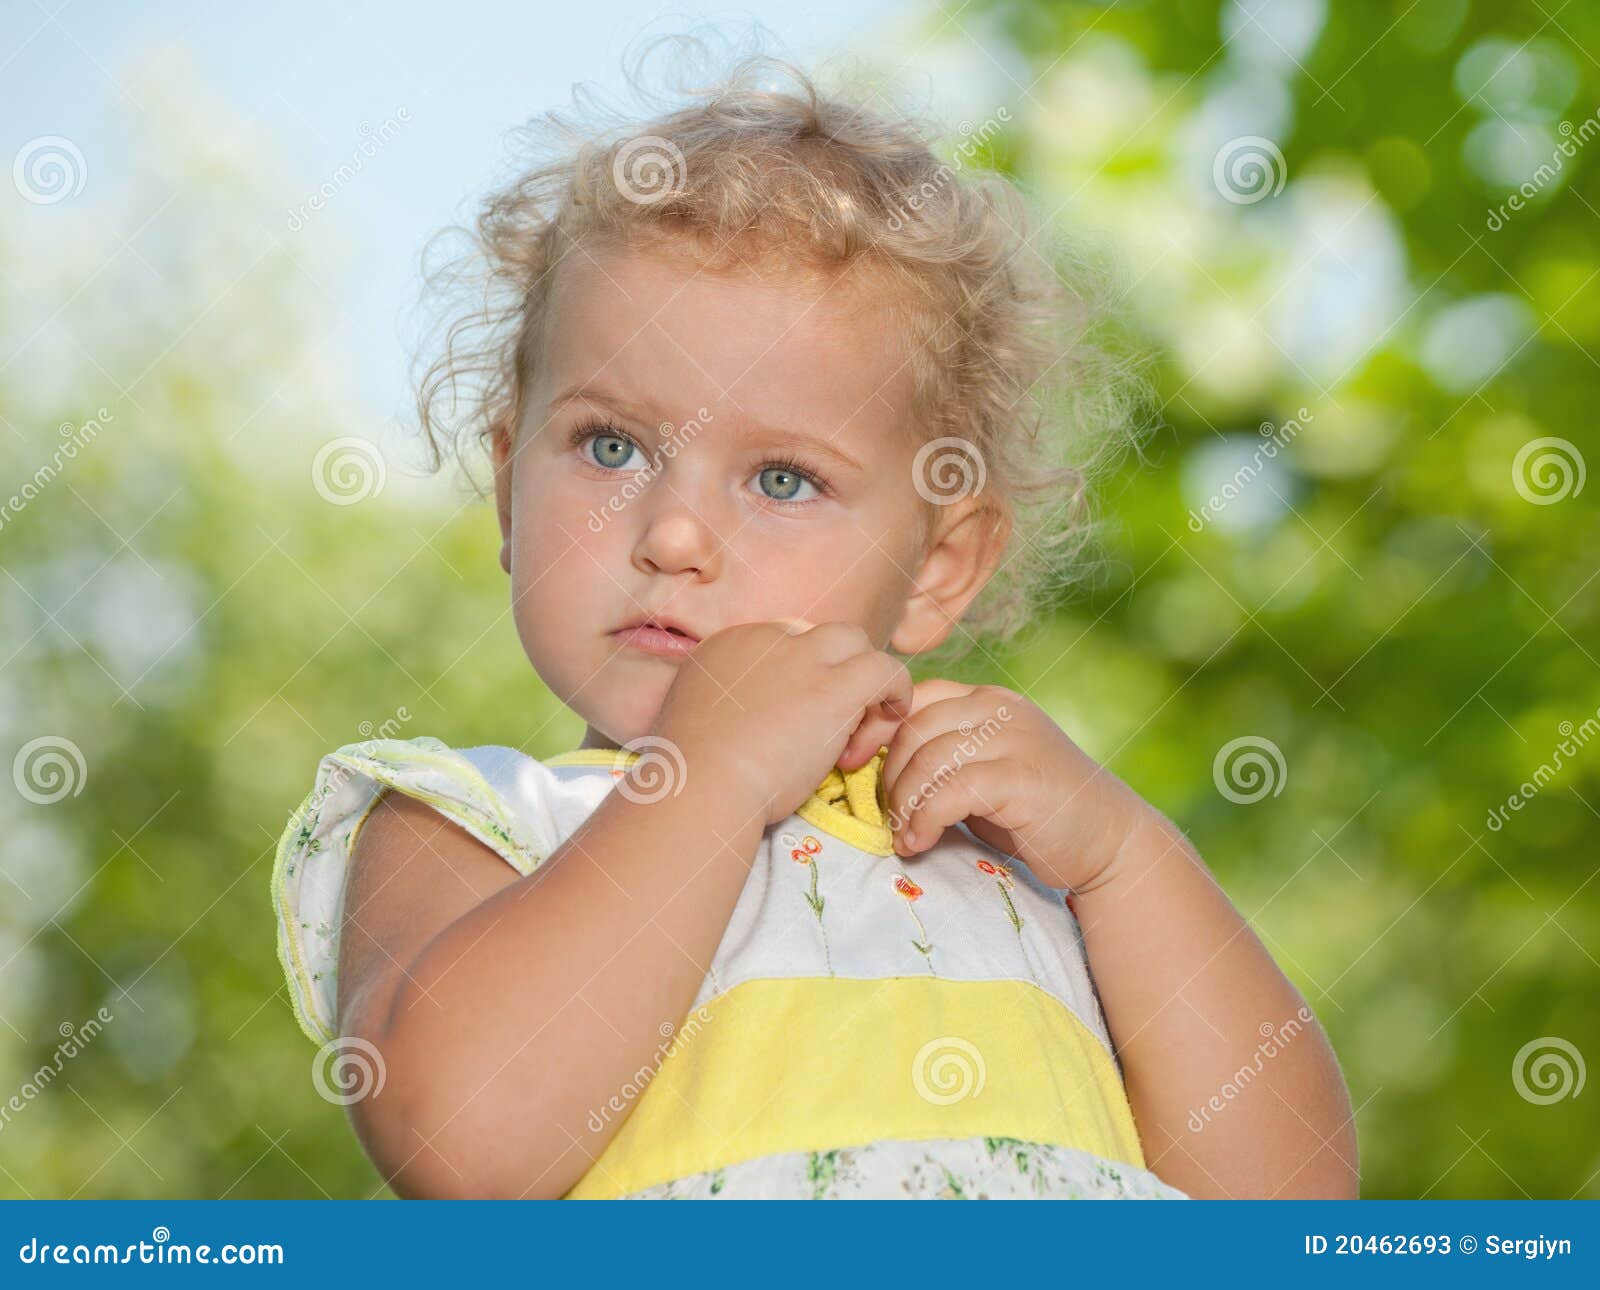 Girl s first grief stock image. Image of girl, leisure - 20462693